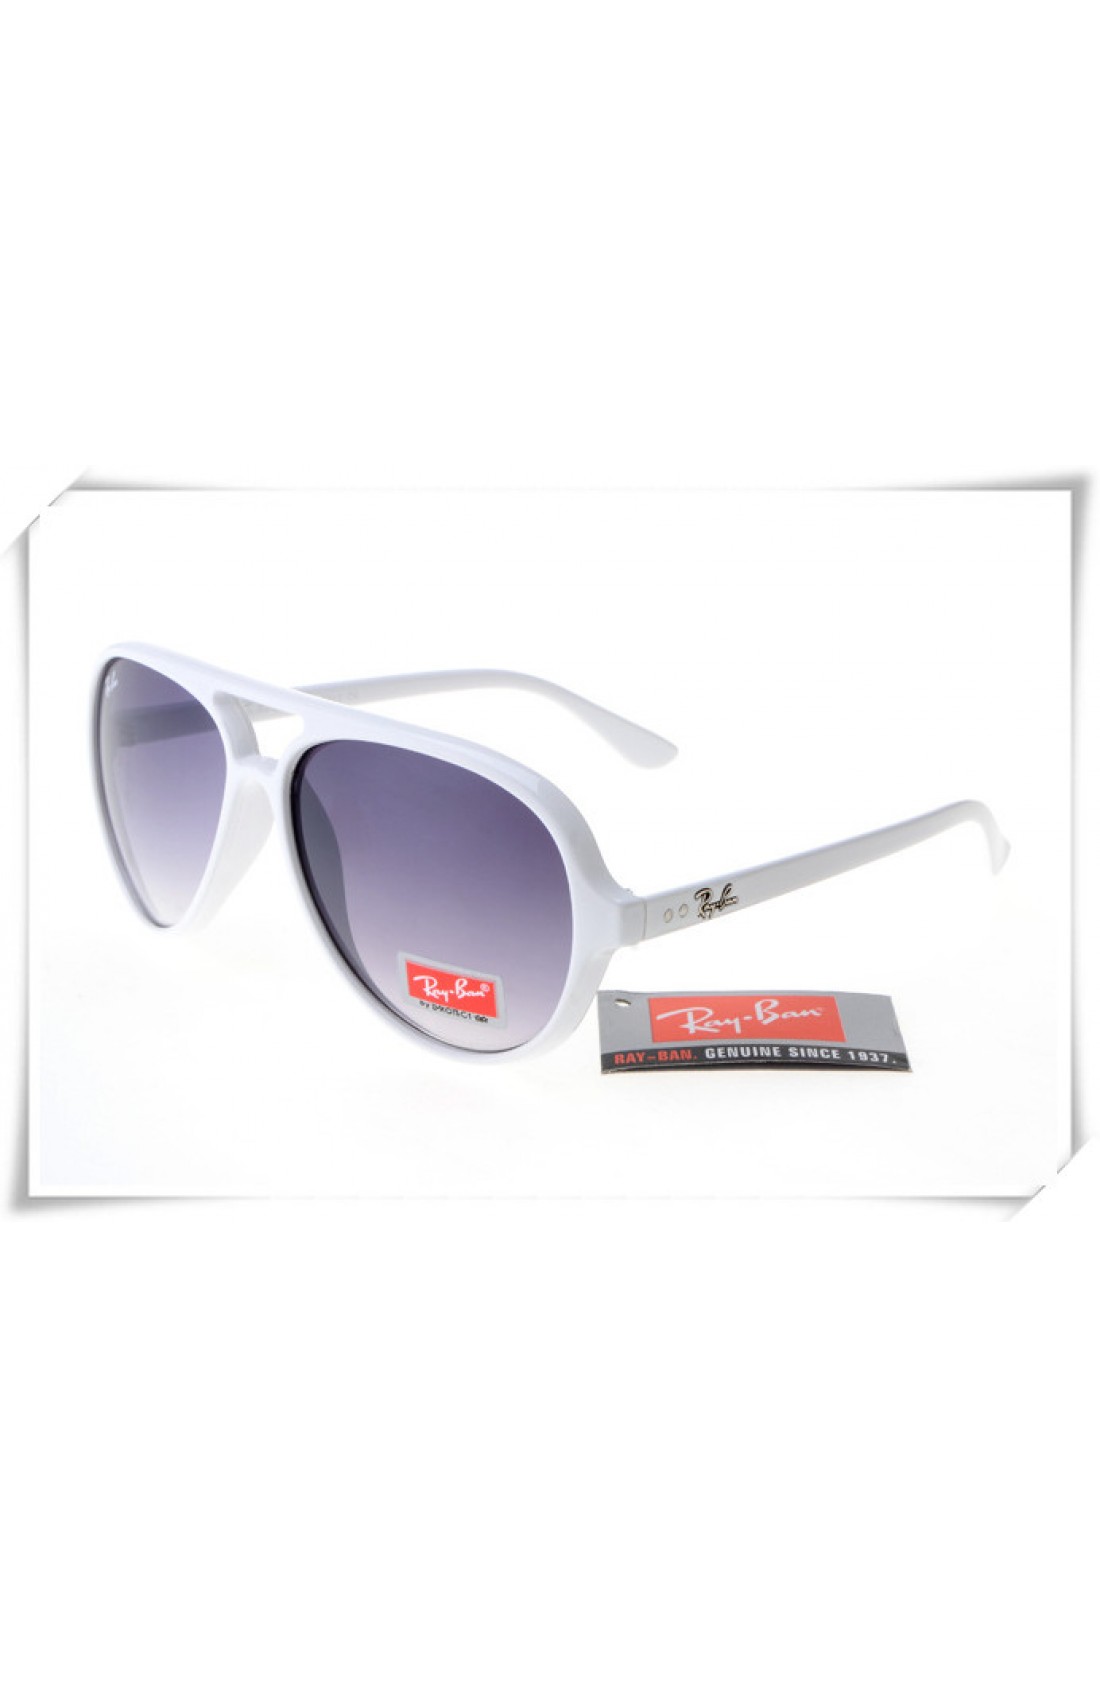 ray ban rb4125 cats 5000 oversized sunglasses